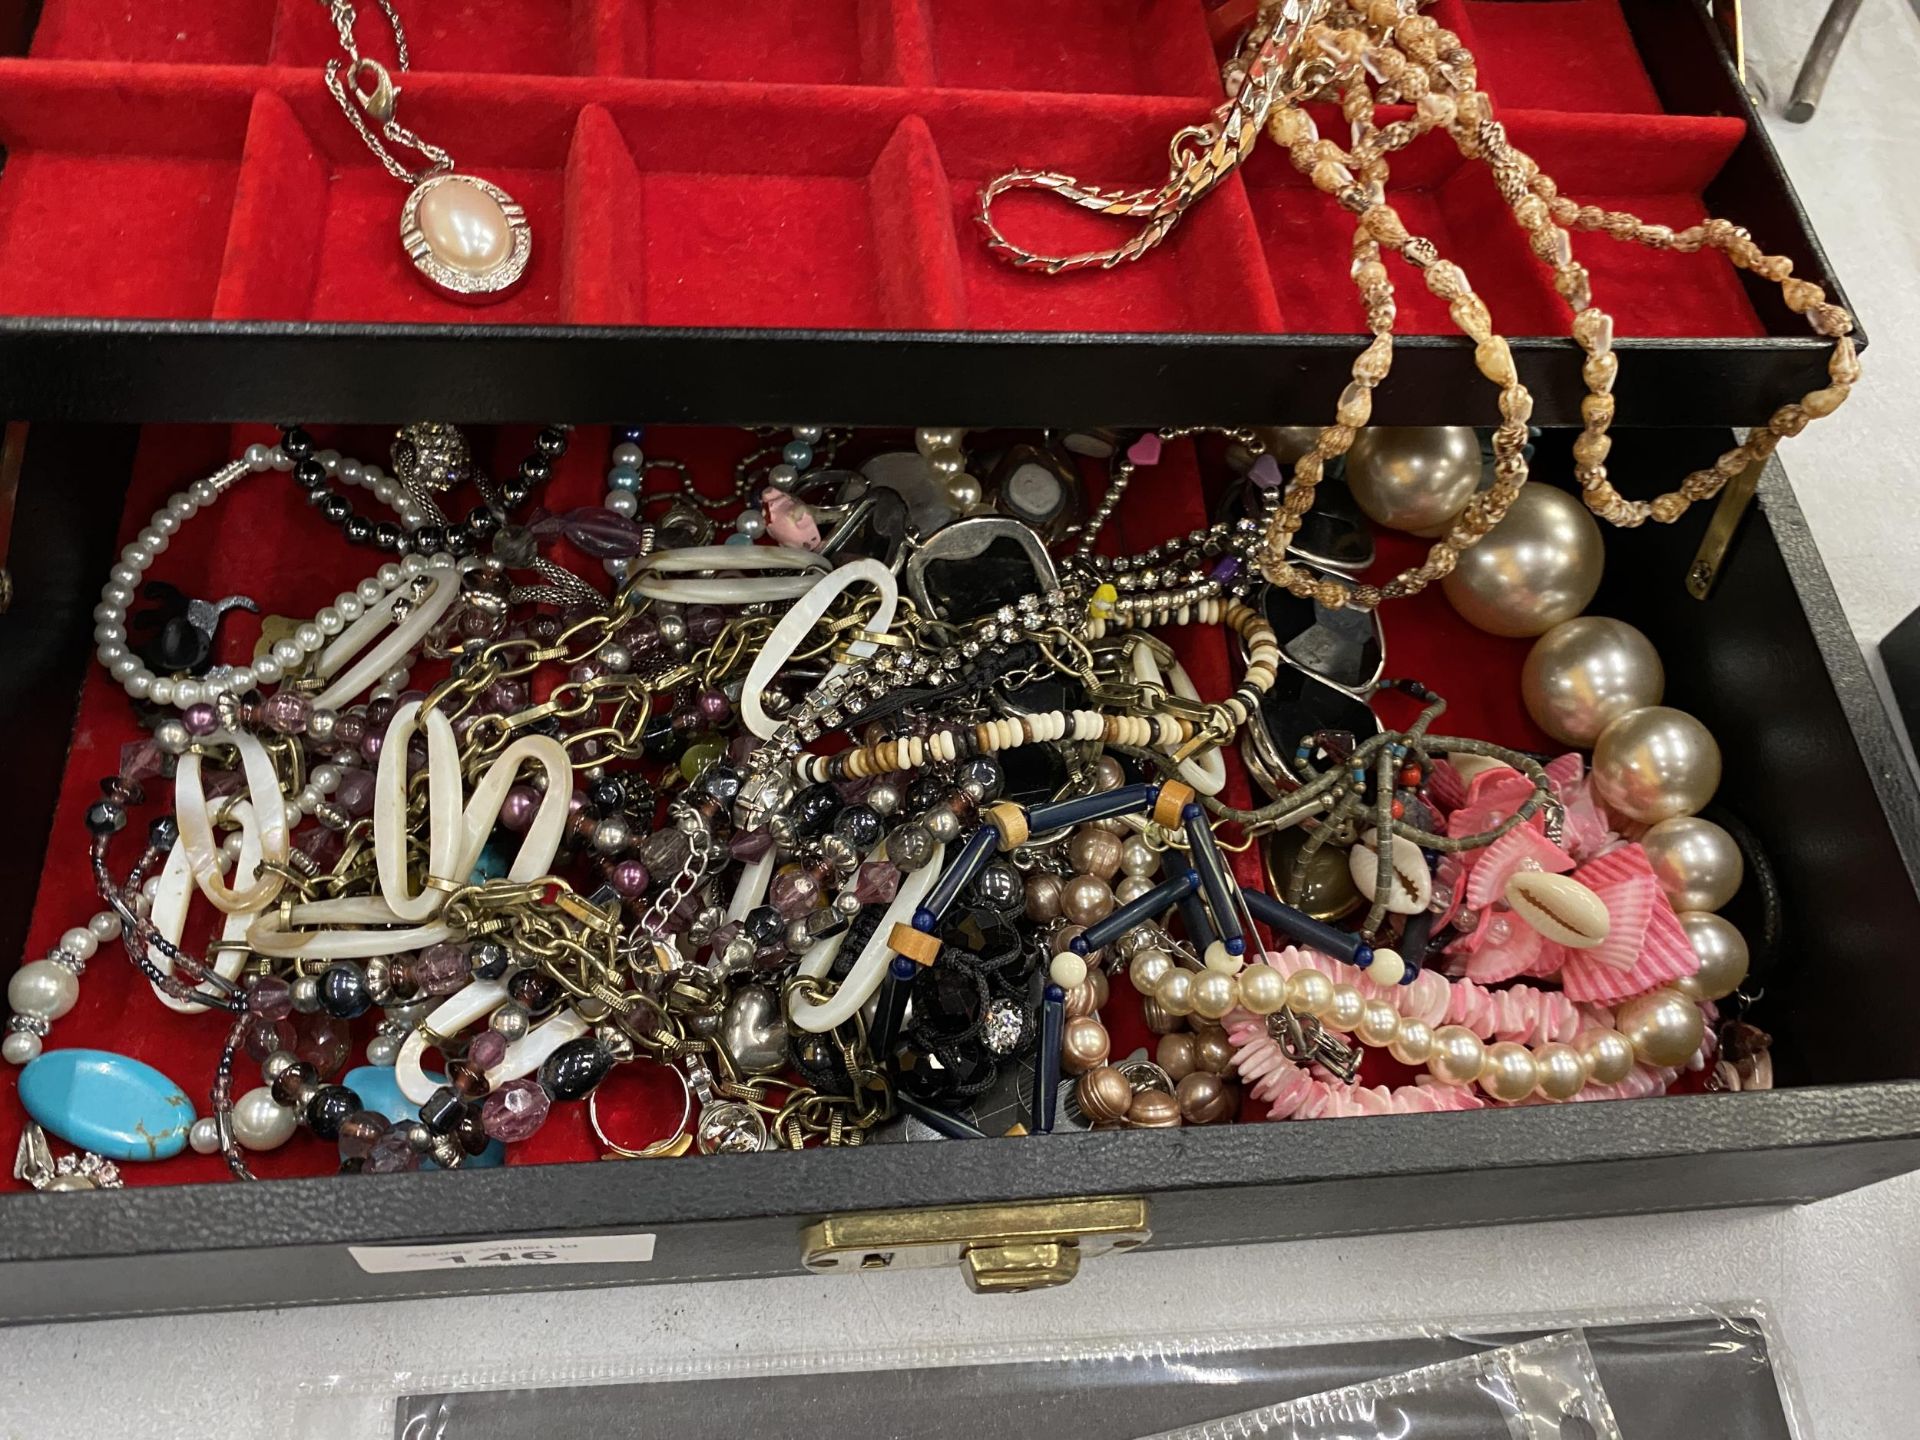 A JEWELLERY BOX CONTAINING A QUANTITY OF COSTUME JEWELLERY TO INCLUDE NECKLACES, BRACELETS, ETC - Image 2 of 2